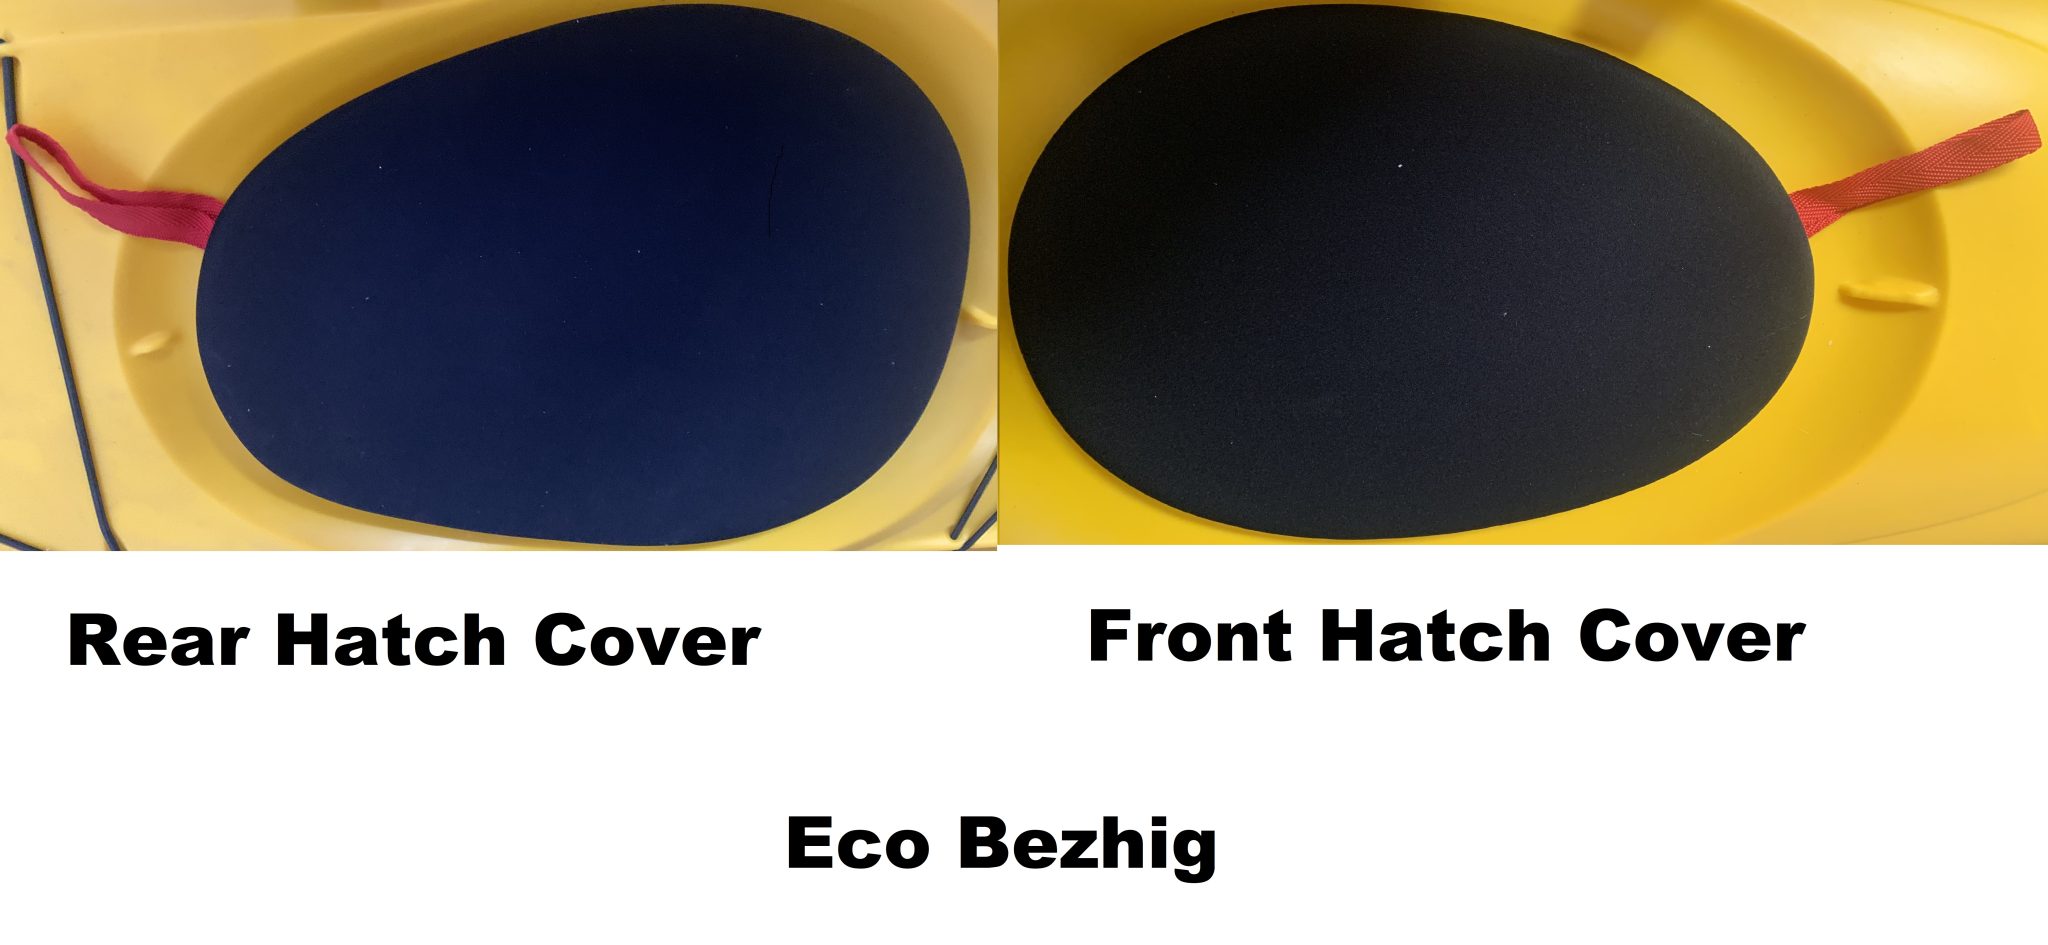 Picture showing both the Neoprene Hatch Covers on theEco Bezhig they are labelled for the Front and Rear